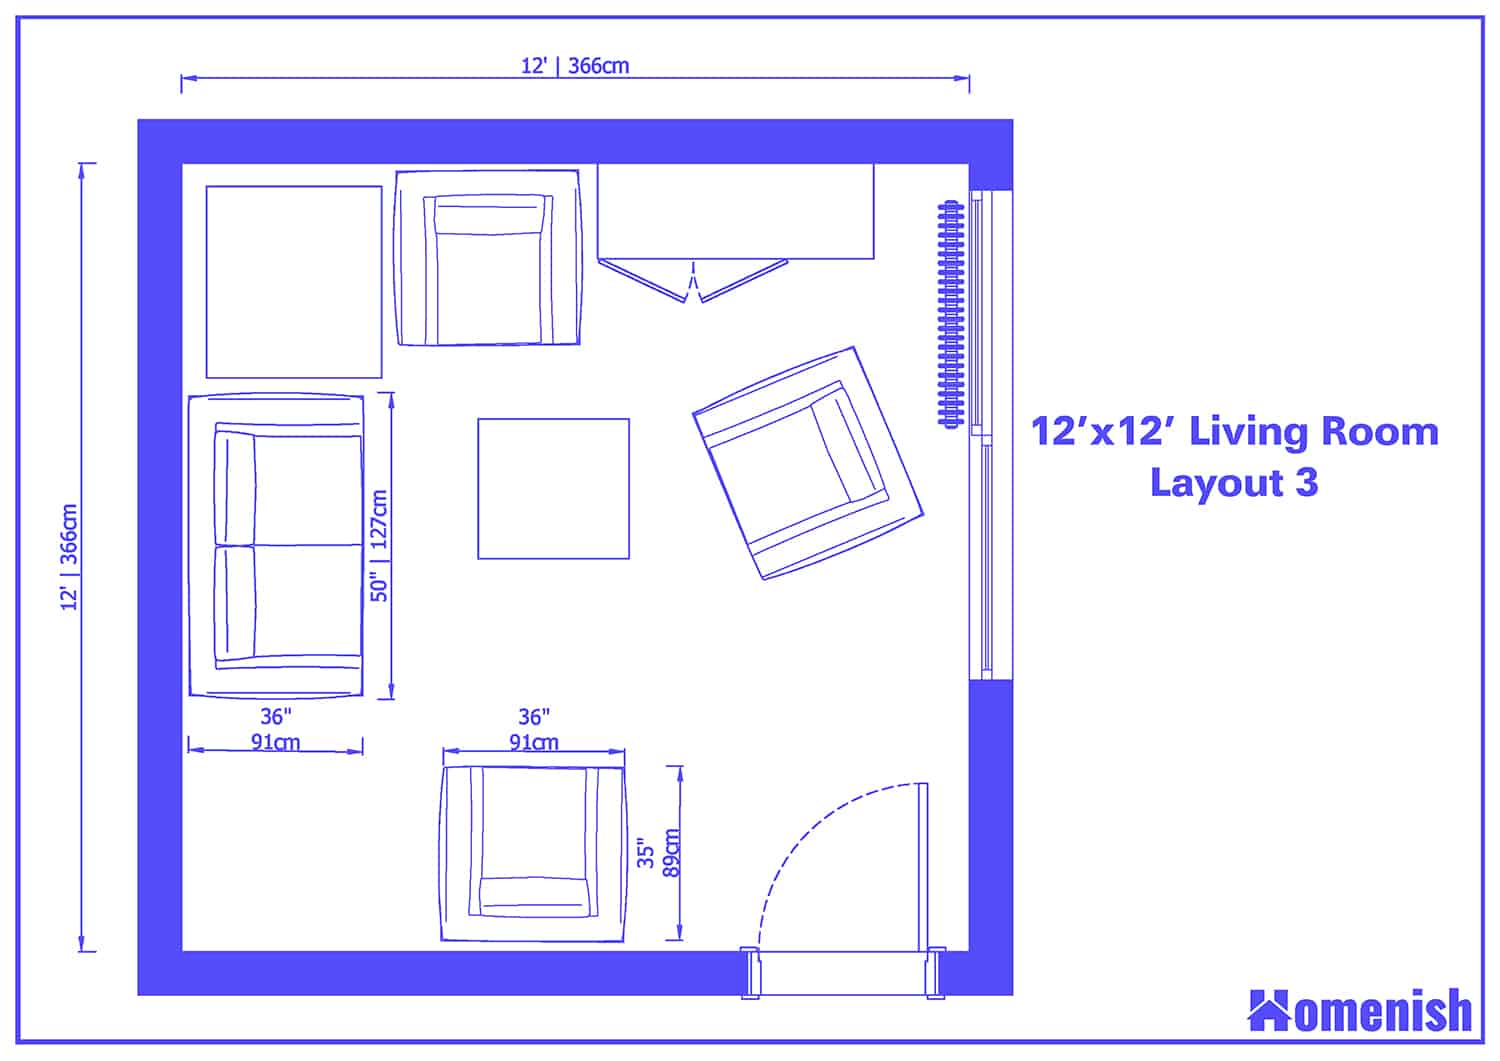 12' x 12' Living Room Layout 3